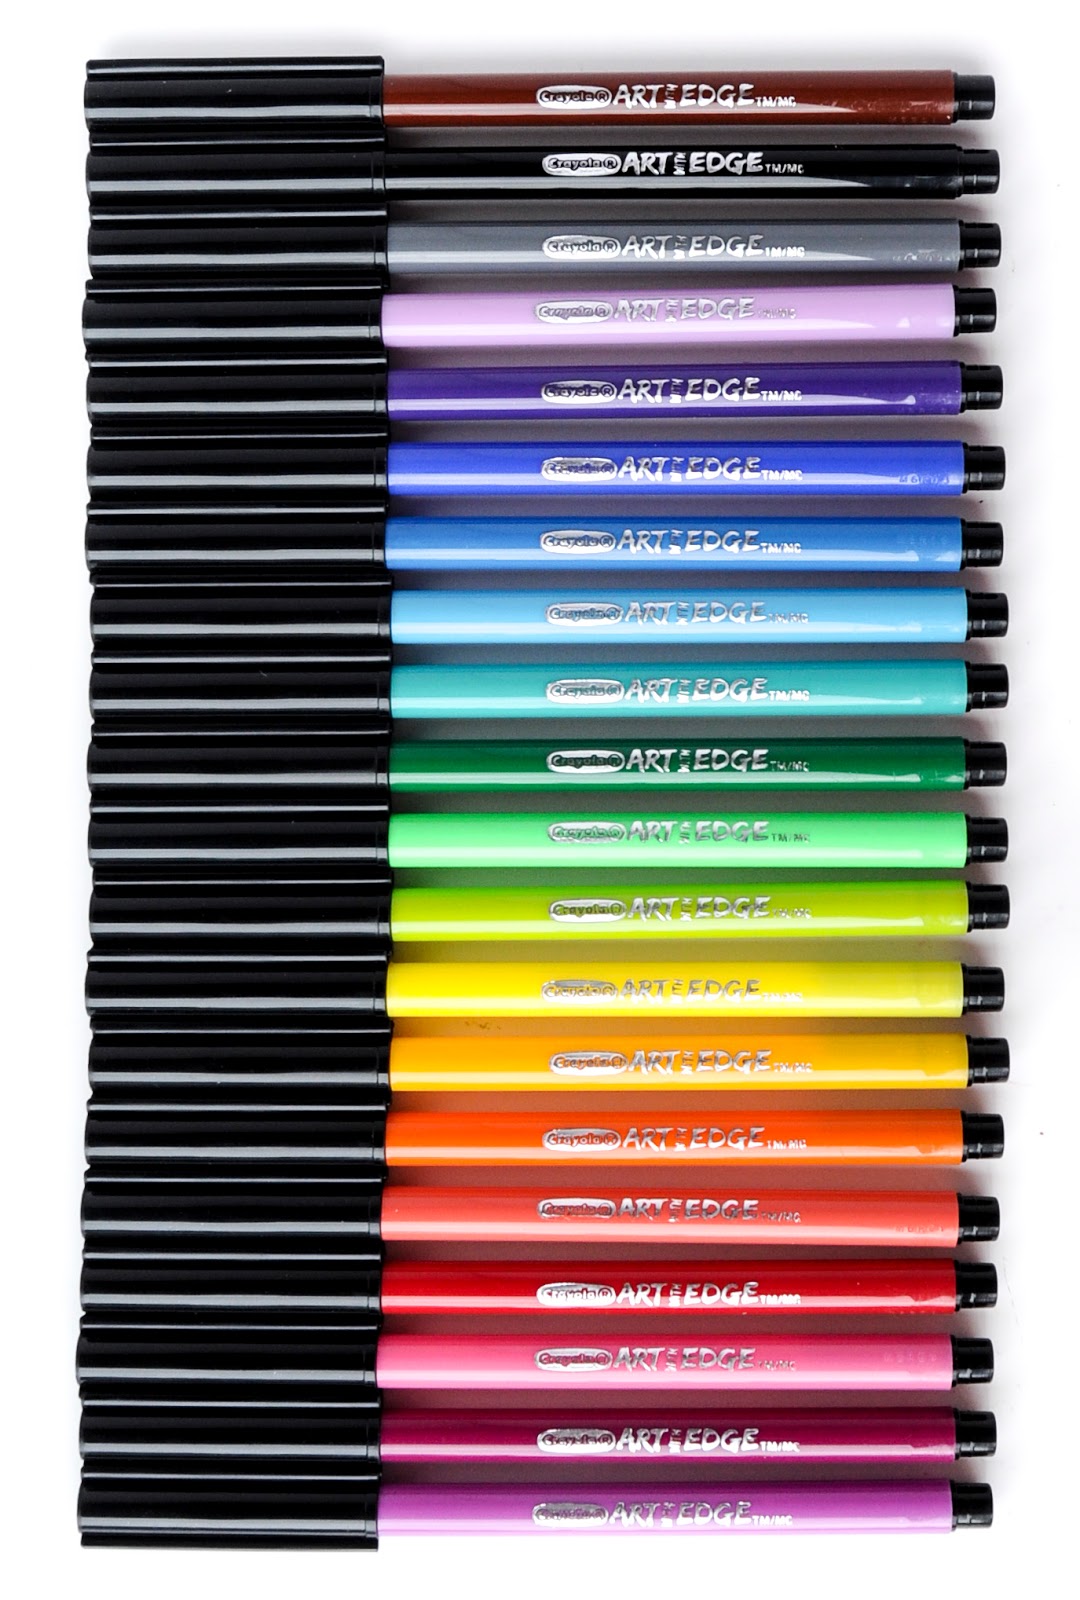 Crayola Art with Edge Say What? 40 Page Coloring Book bundled with 12 Crayola Wedge Markers 